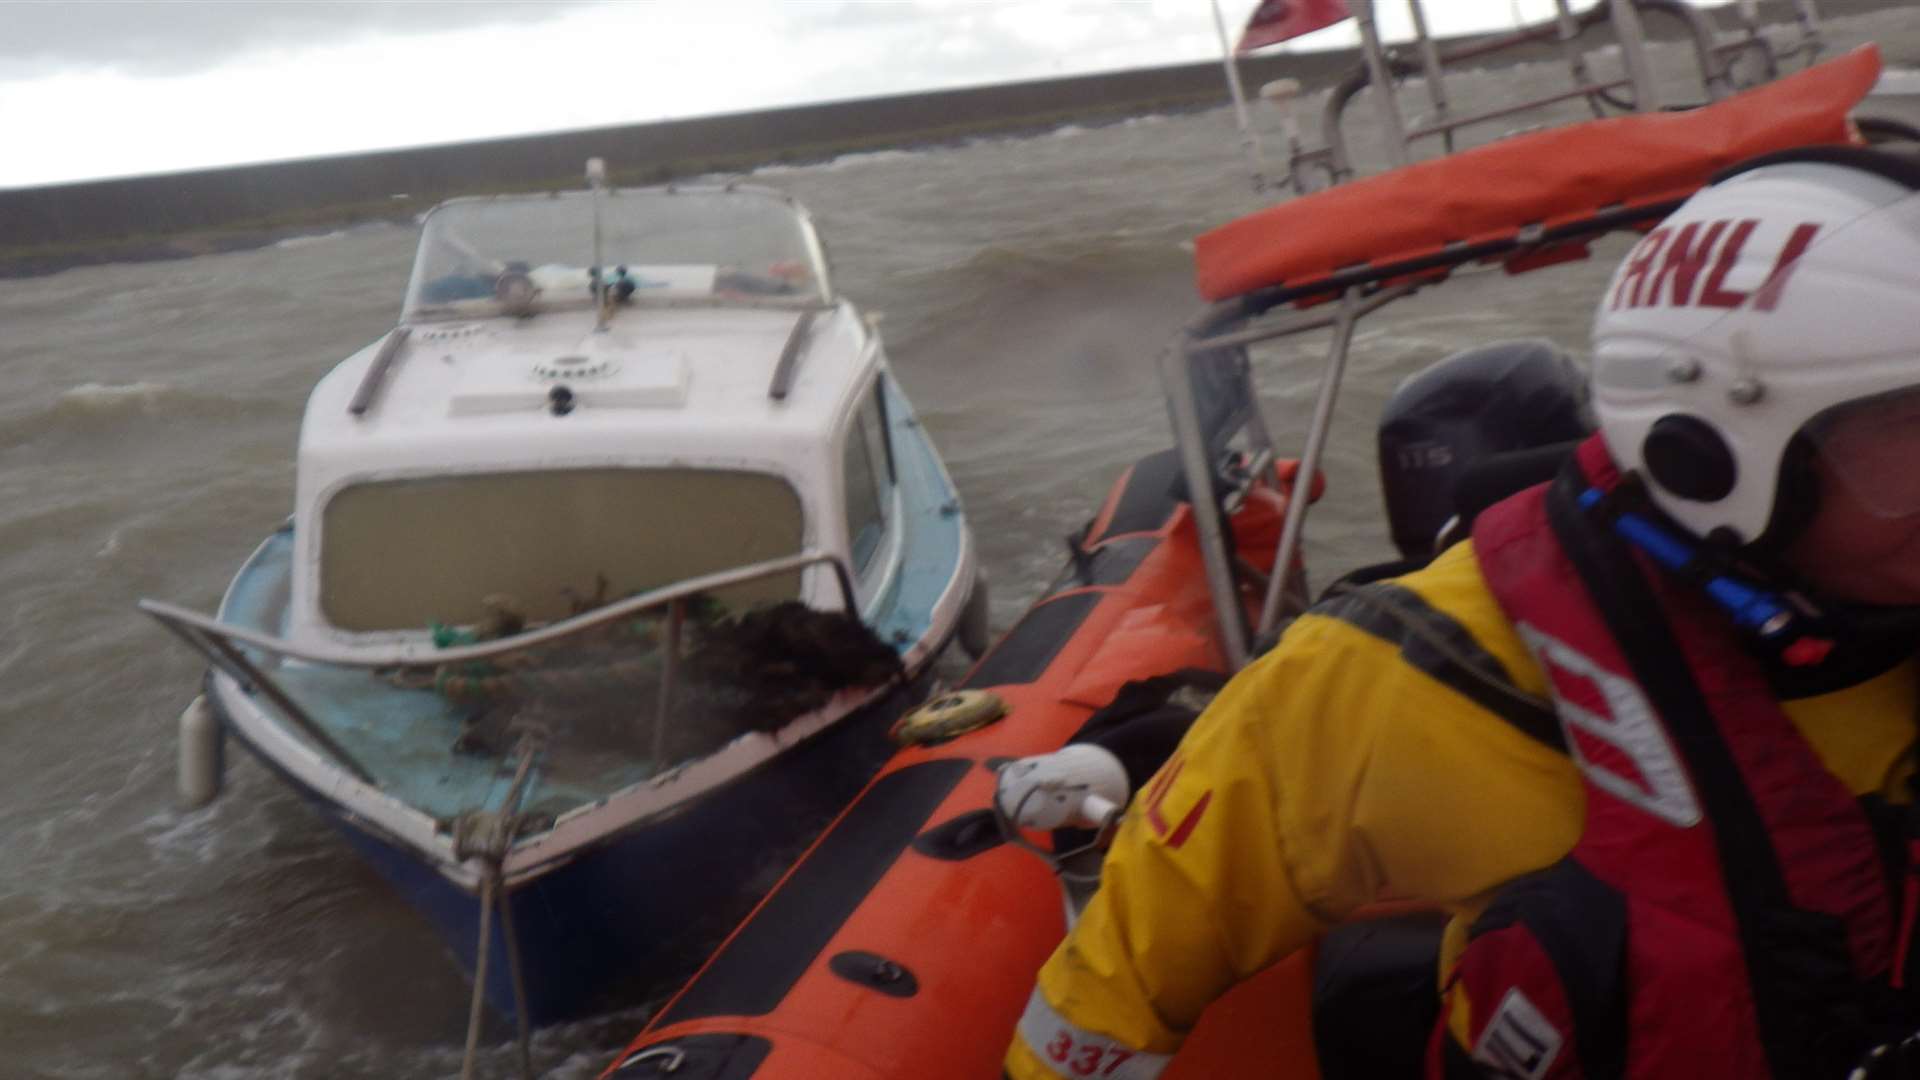 The vessel secured by the tow line to the RNLI launch. Picture: RNLI/Alan Carr